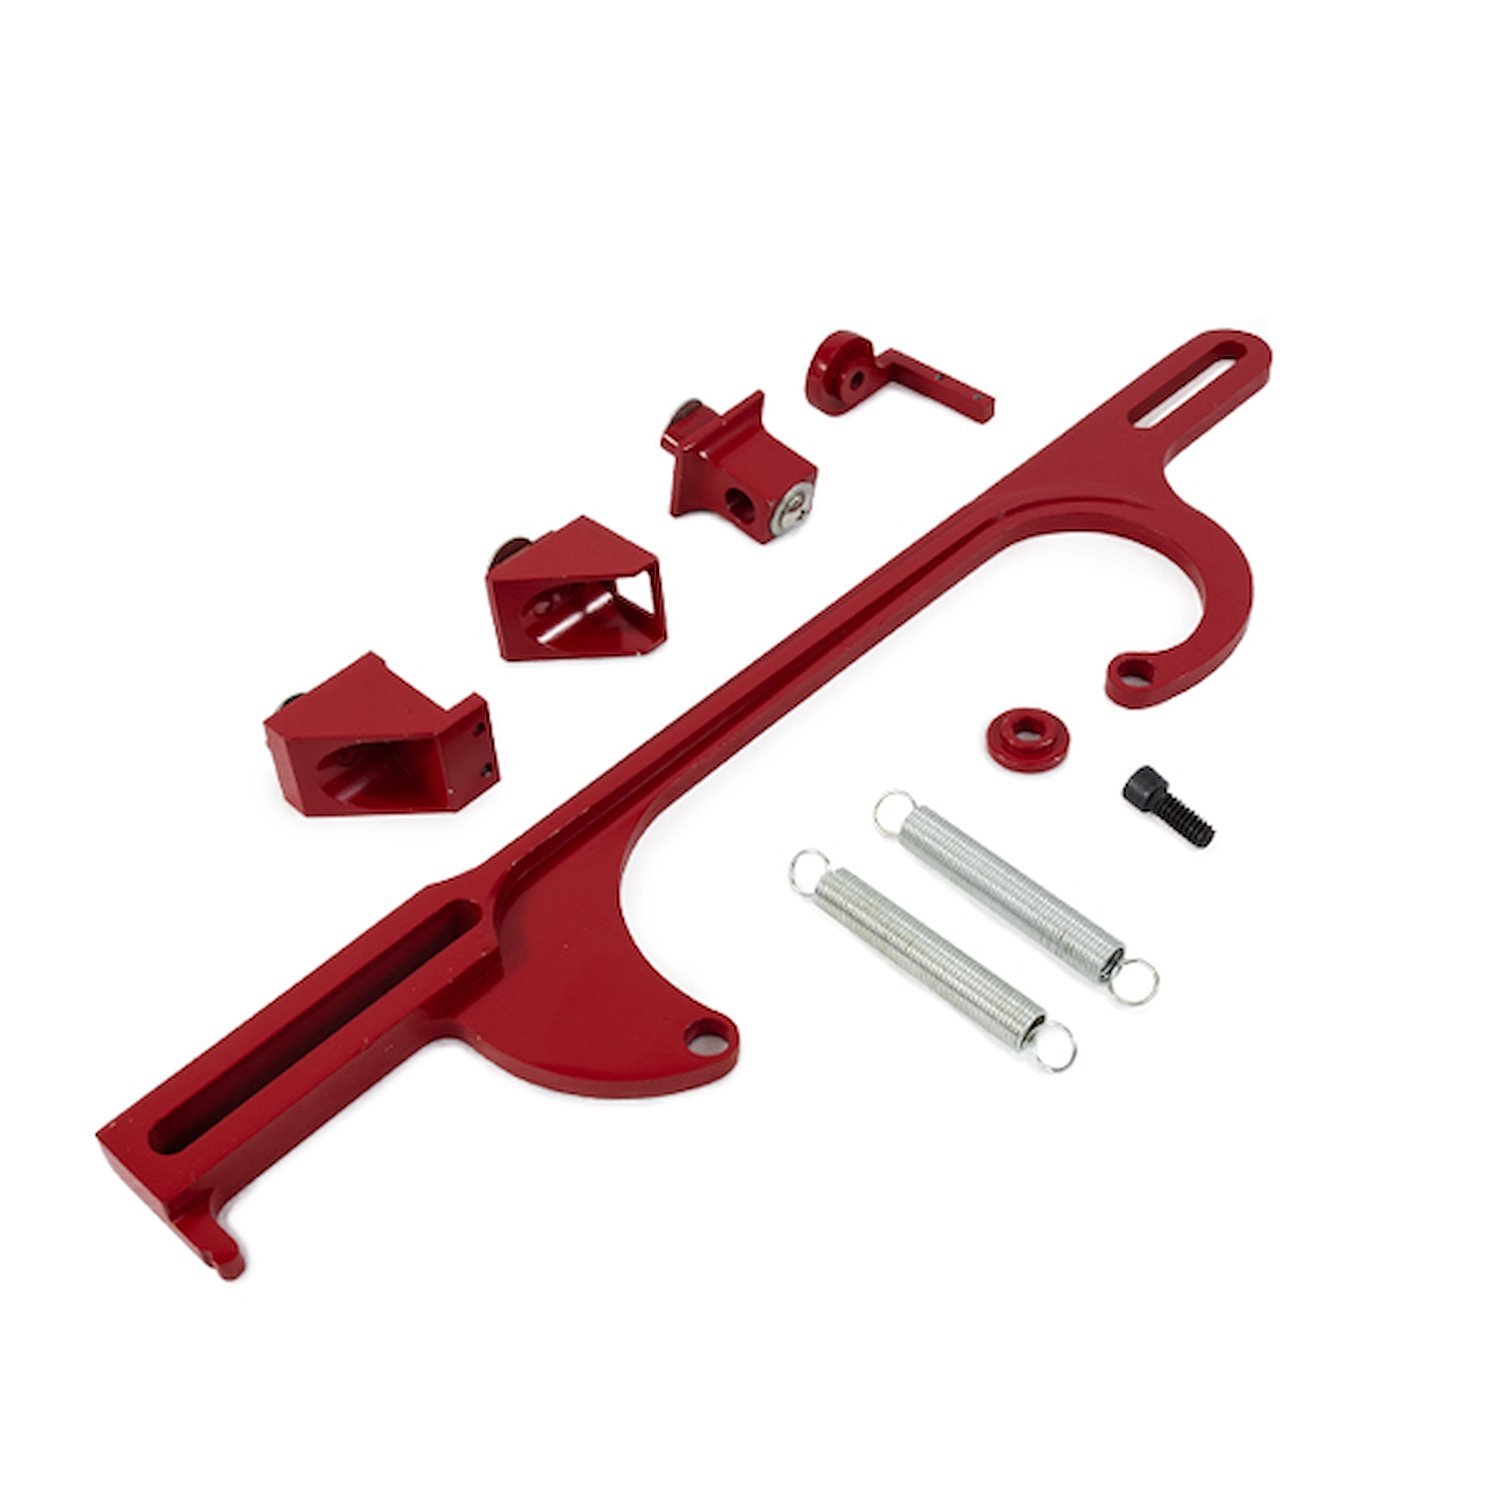 JM3101R Throttle Cable Bracket, Holley 4150/4160 Style 4 BBL, Red